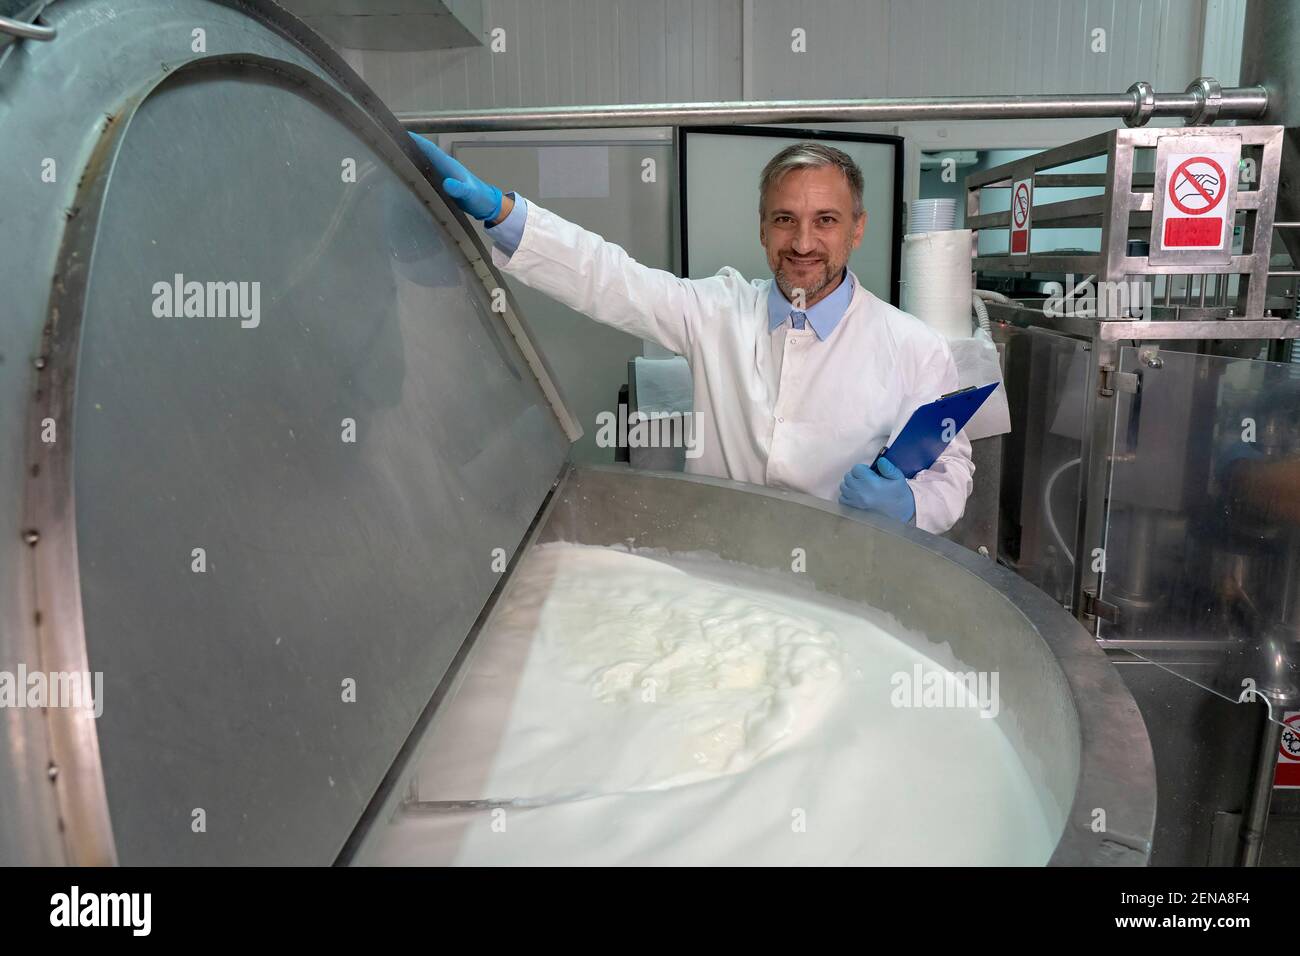 Portrait of Food Engineer in Dairy Plant. Milk Pasteurization in Dairy Processing Plant. Milk inside the Pasteurization Tank. Dairy Plant Food Safety. Stock Photo